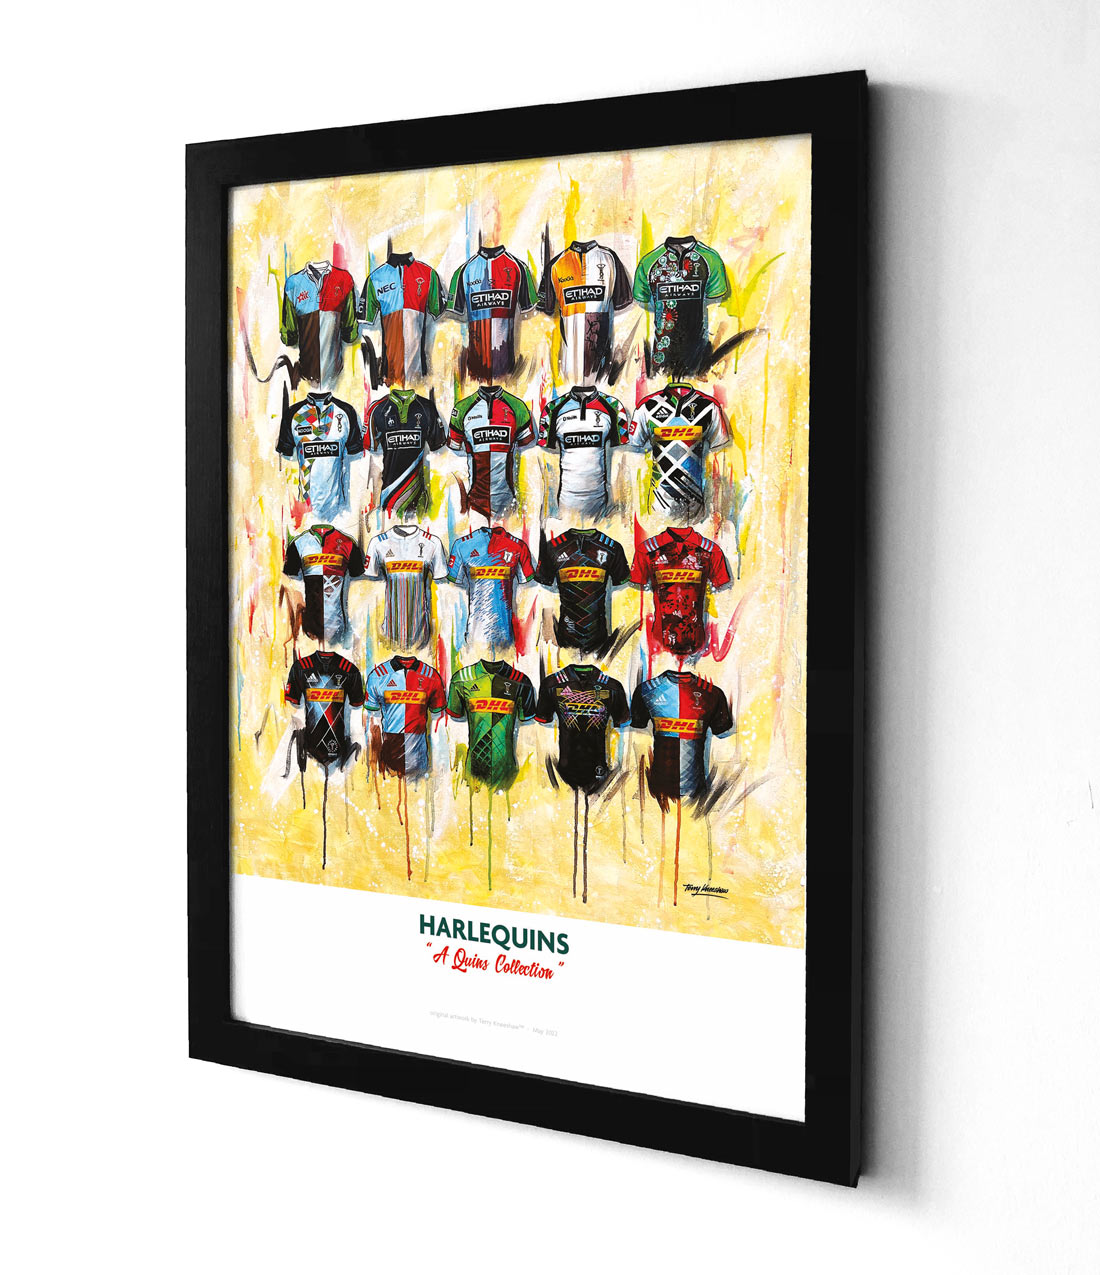 Artwork by Terry Kneeshaw depicting a collection of twenty iconic Harlequins rugby jerseys worn by the team's players throughout their history. The jerseys feature a variety of patterns and designs, with the Harlequins logo prominently displayed on the front. The artwork is a high-quality print of a hand-painted original, which uses textured brushstrokes to create a dynamic effect. 